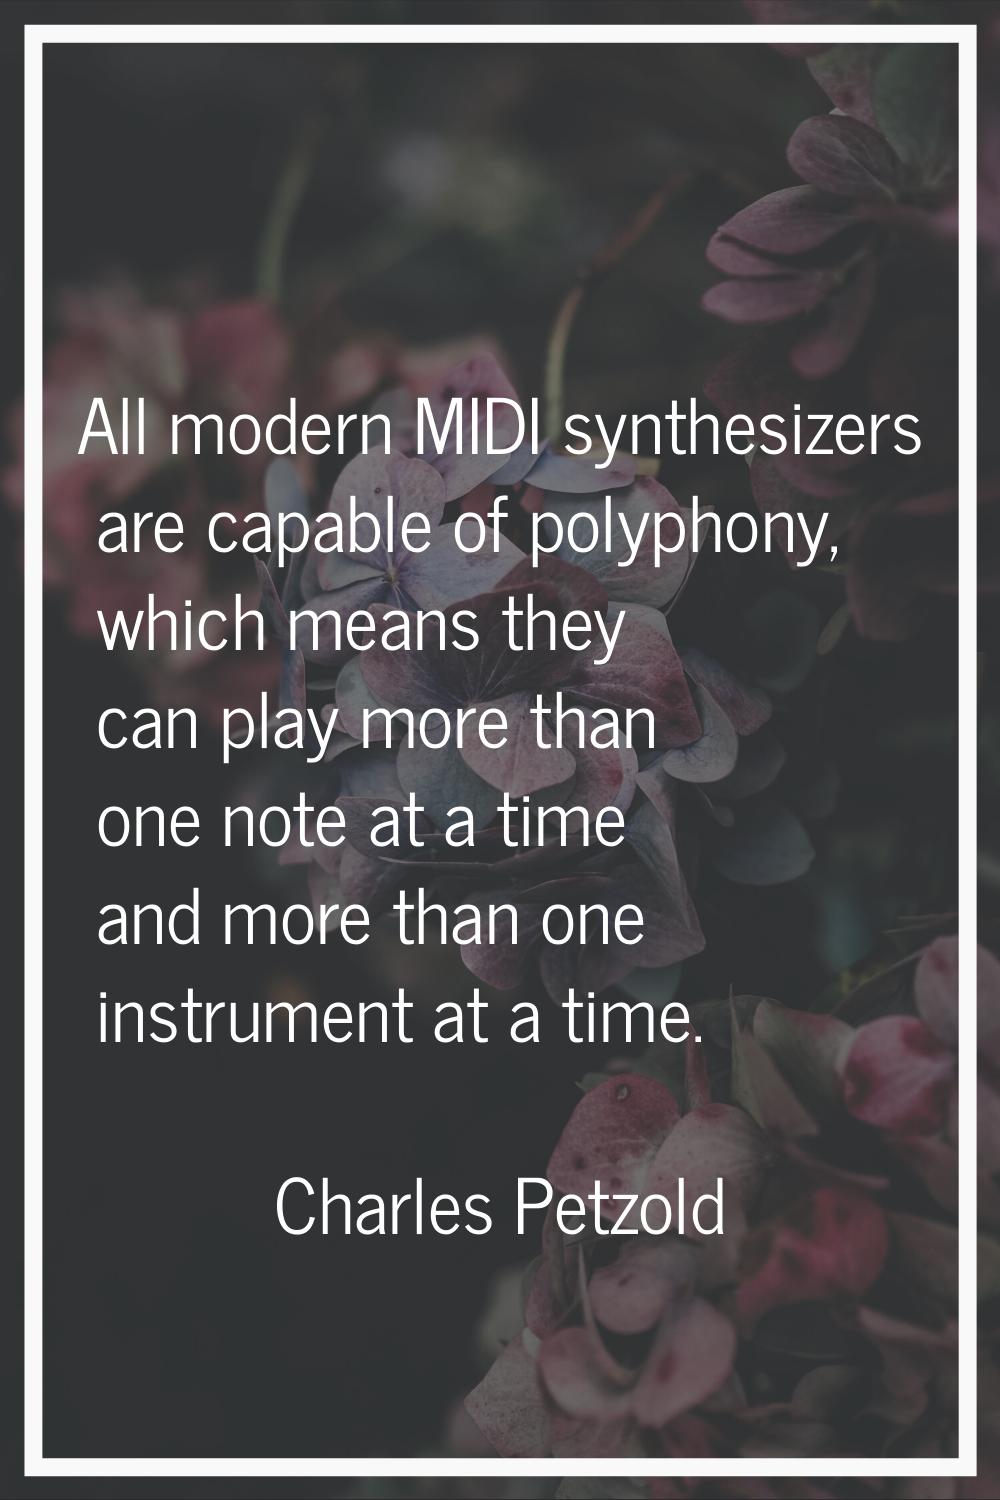 All modern MIDI synthesizers are capable of polyphony, which means they can play more than one note